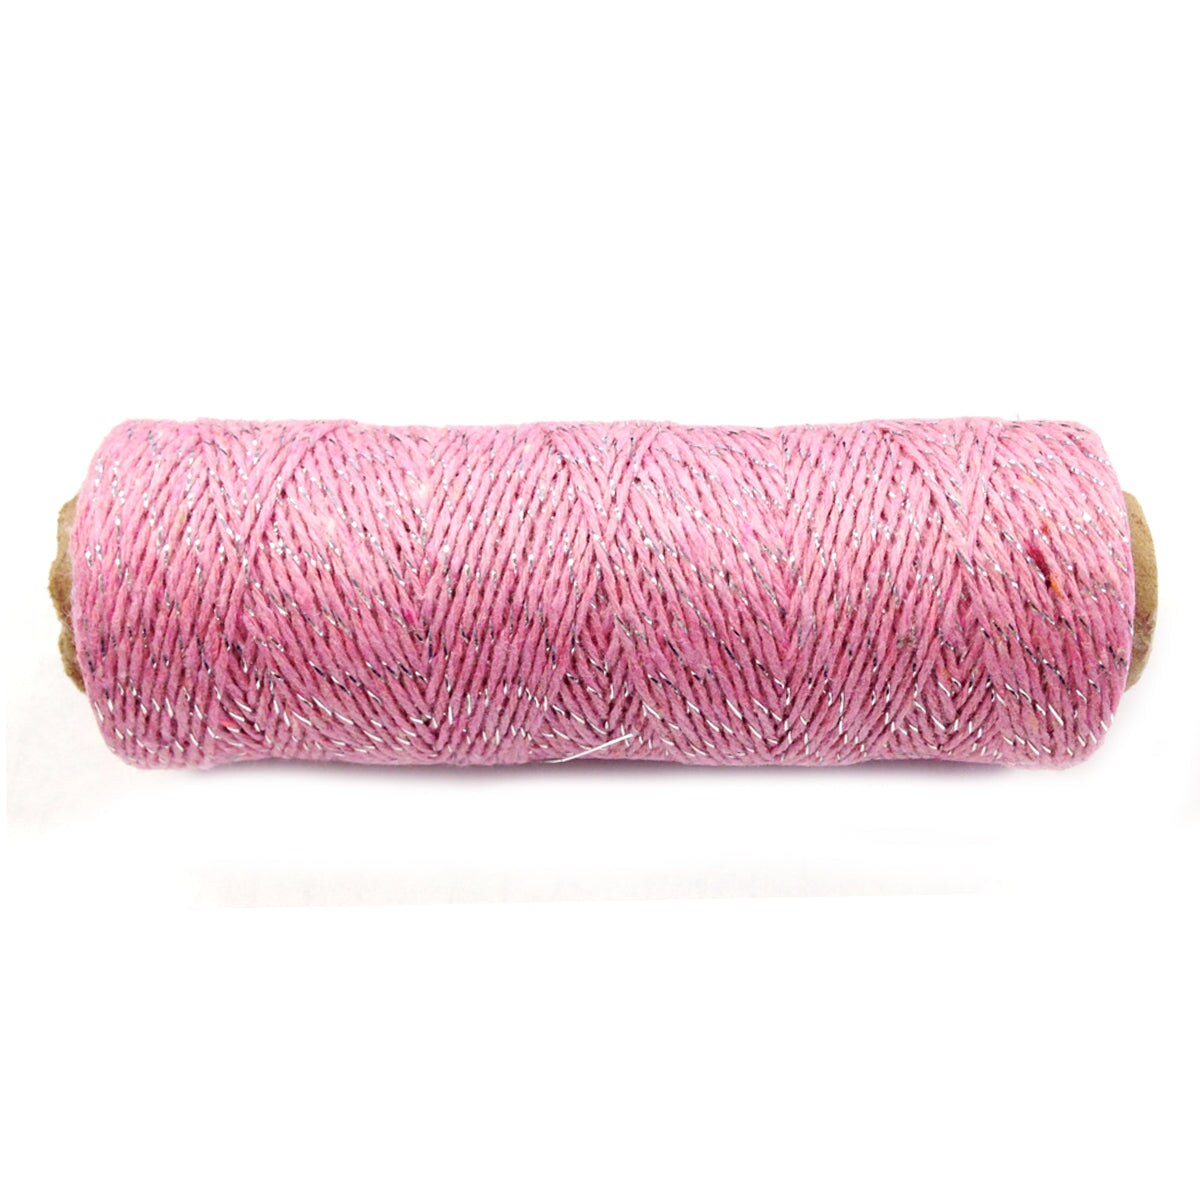 Wrapables Cotton Baker&#x27;s Twine 4ply 110 Yard, Pink and Metallic Silver